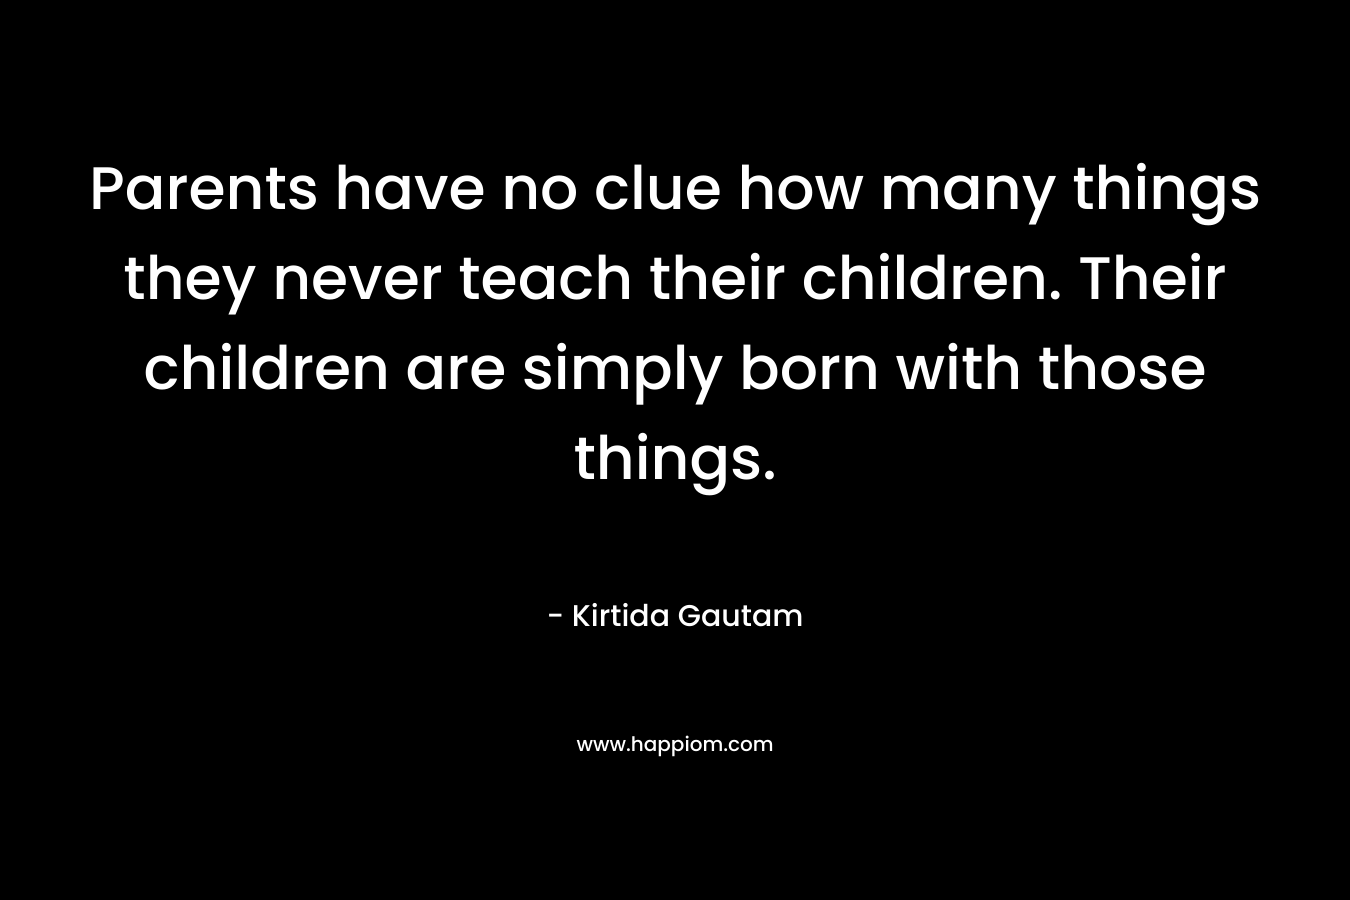 Parents have no clue how many things they never teach their children. Their children are simply born with those things.